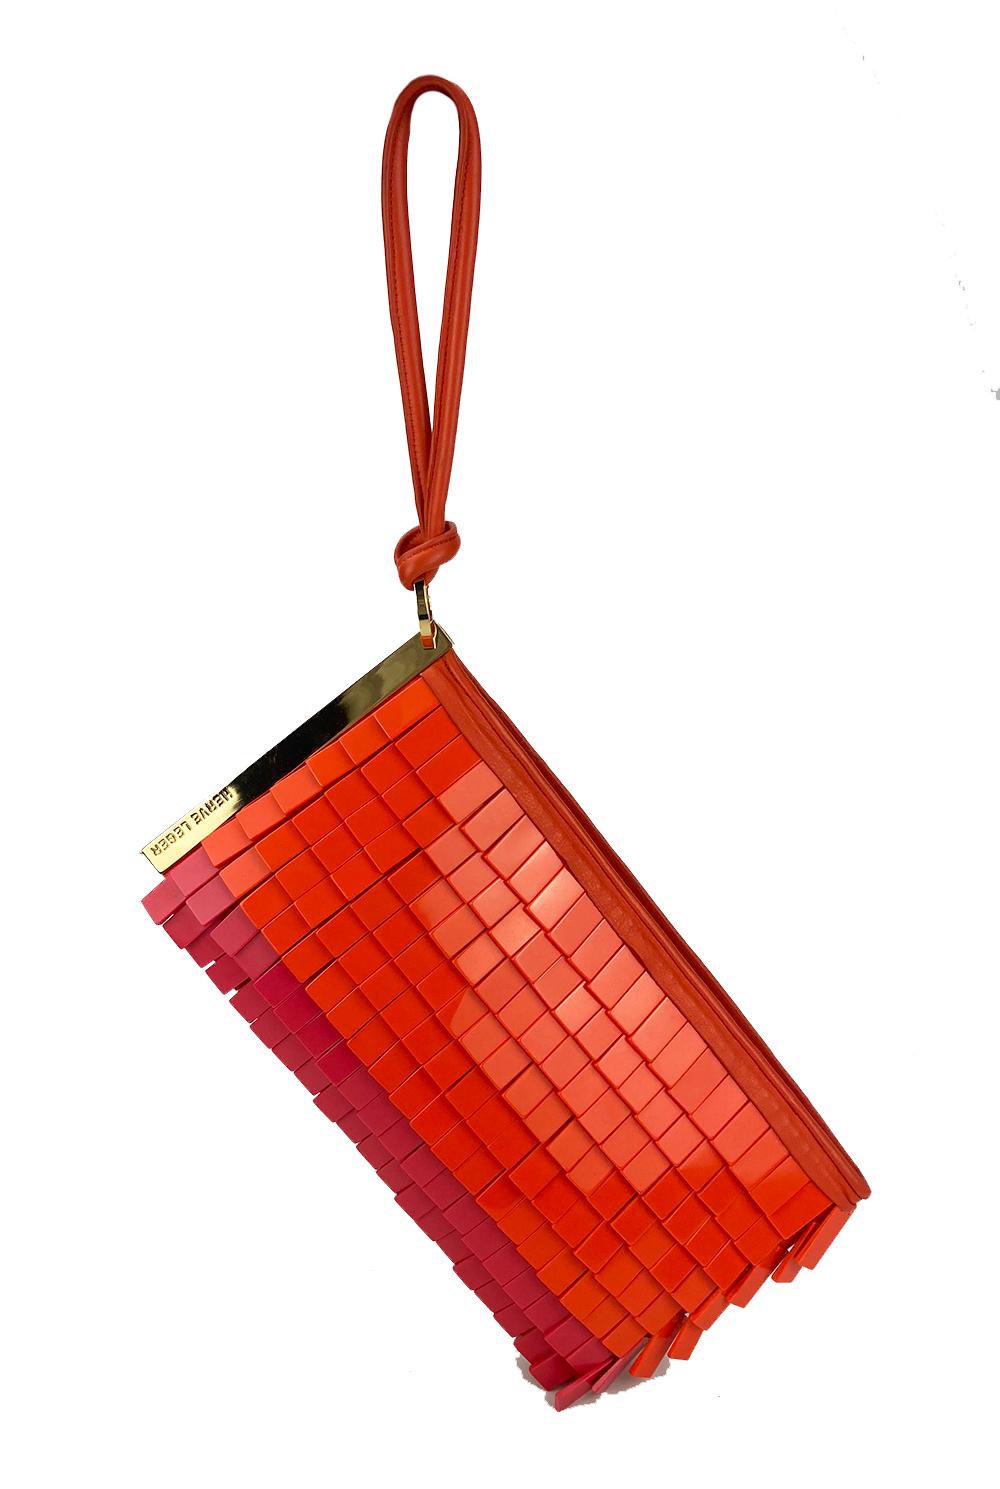 Herve Leger Orange and Pink Acrylic Chip Fringe Clutch In Excellent Condition For Sale In Philadelphia, PA